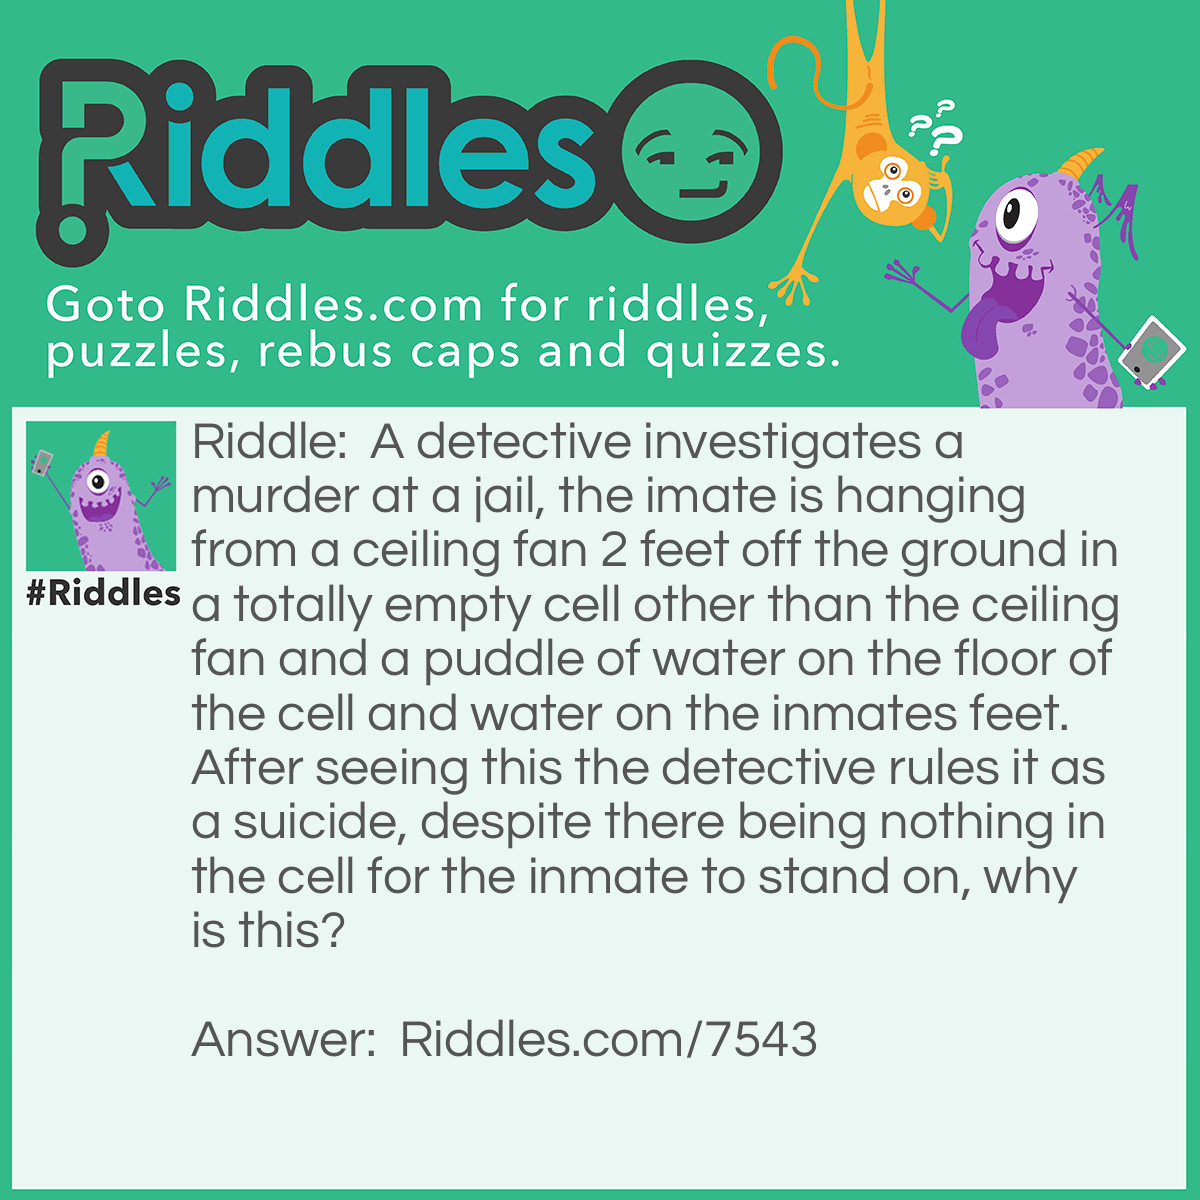 Riddle: A detective investigates a murder at a jail, the imate is hanging from a ceiling fan 2 feet off the ground in a totally empty cell other than the ceiling fan and a puddle of water on the floor of the cell and water on the inmates feet. After seeing this the detective rules it as a suicide, despite there being nothing in the cell for the inmate to stand on, why is this? Answer: The inmate stood on a block of ice and waited for it to melt.